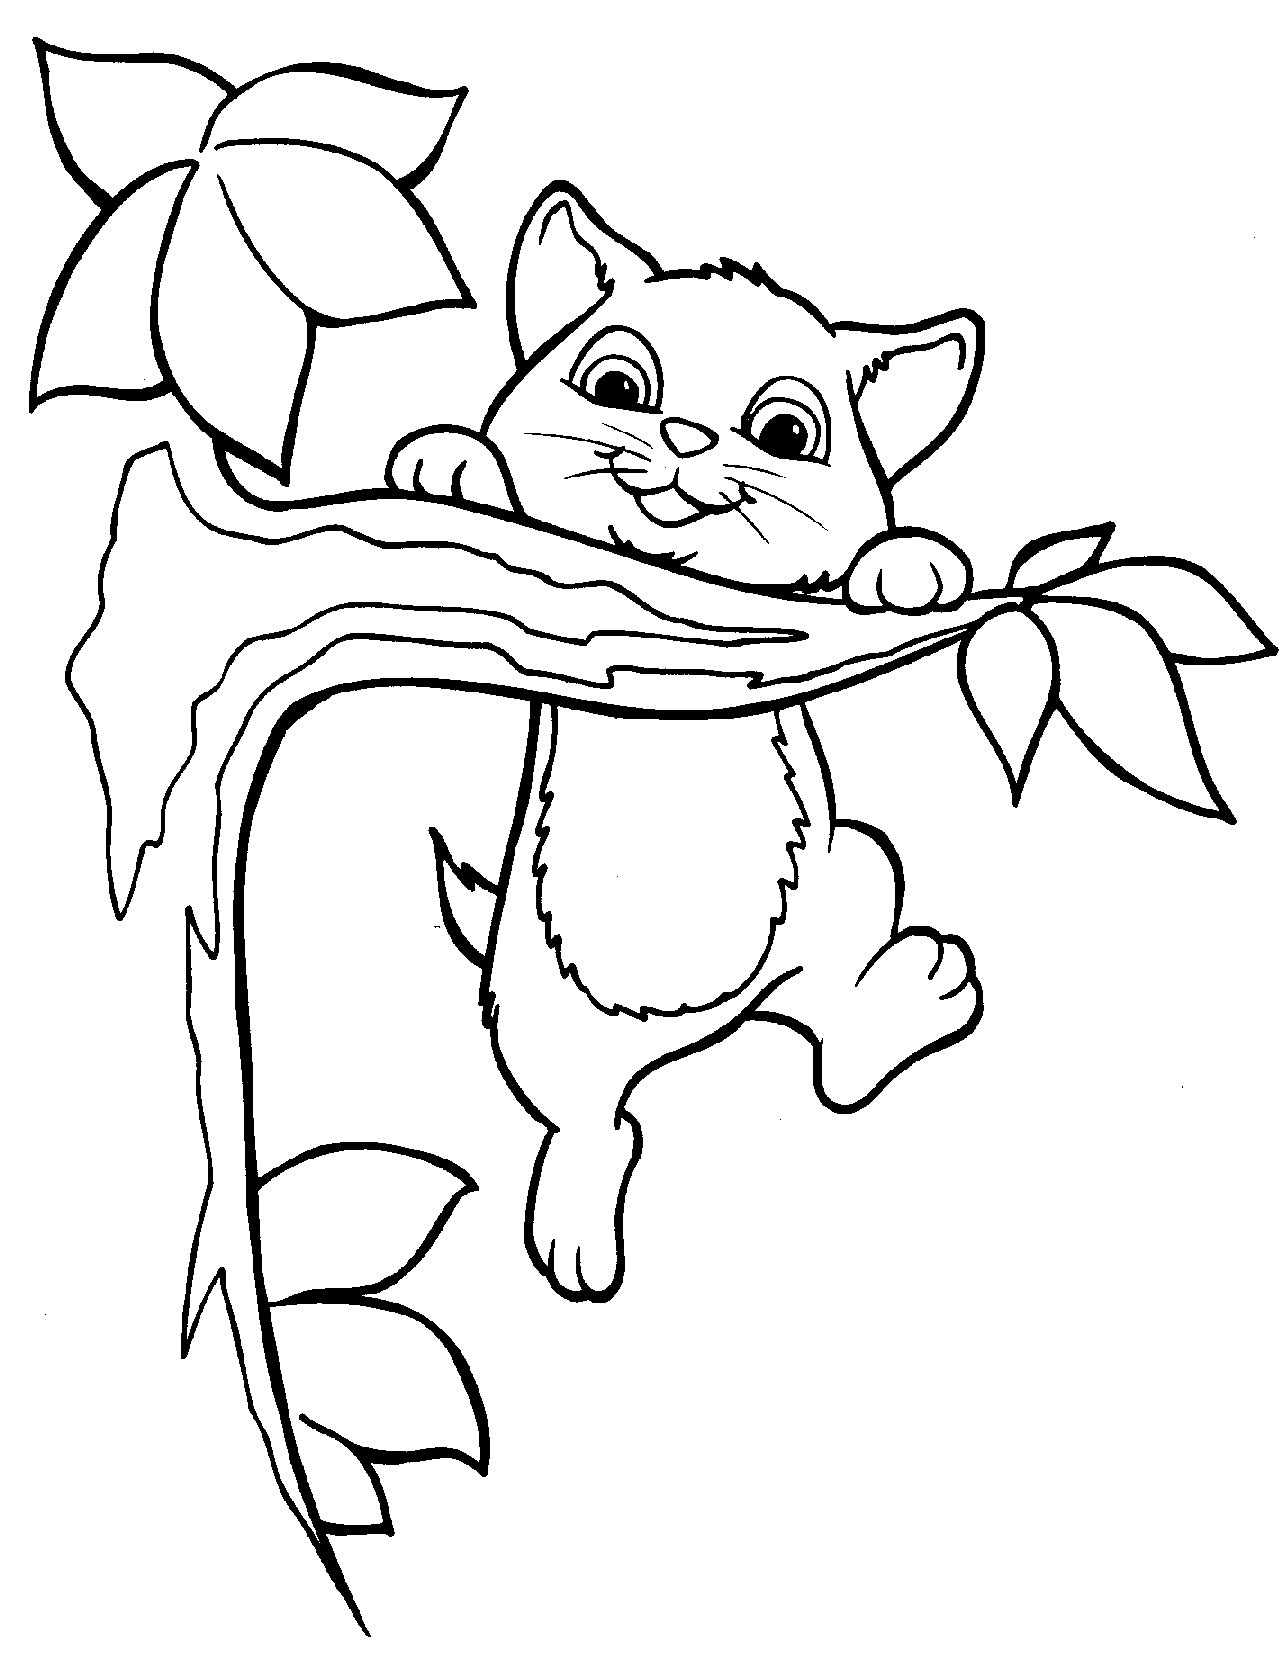 Baby Kitty Coloring Pages
 Free Printable Kitten Coloring Pages For Kids Best